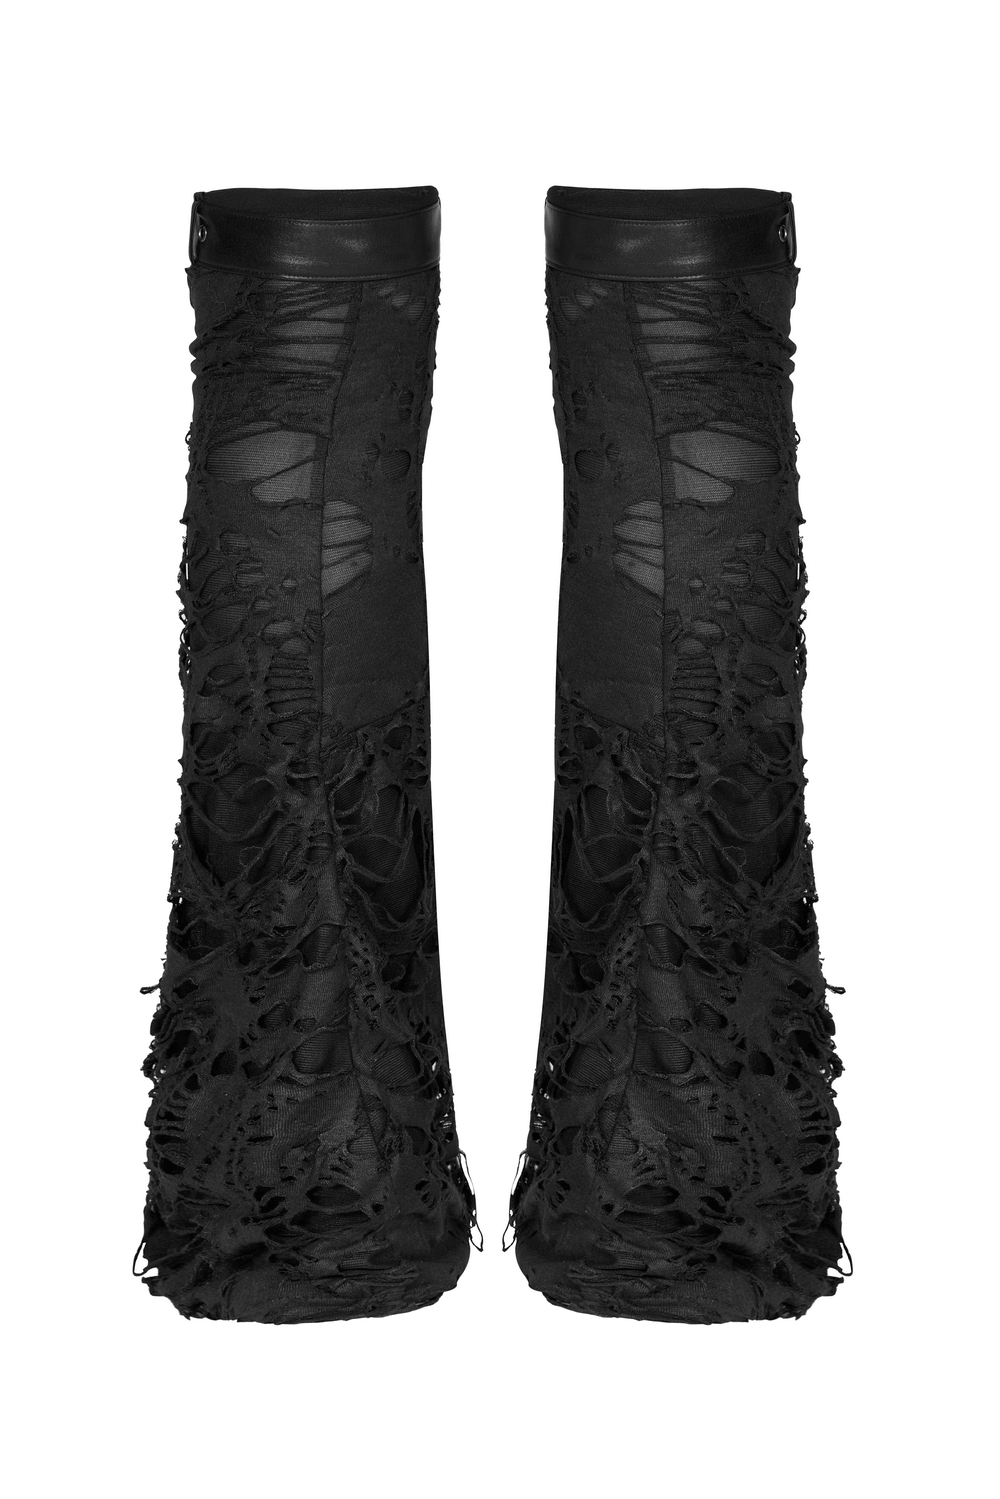 Women's Gothic Ripped Strappy Long Leg Warmers